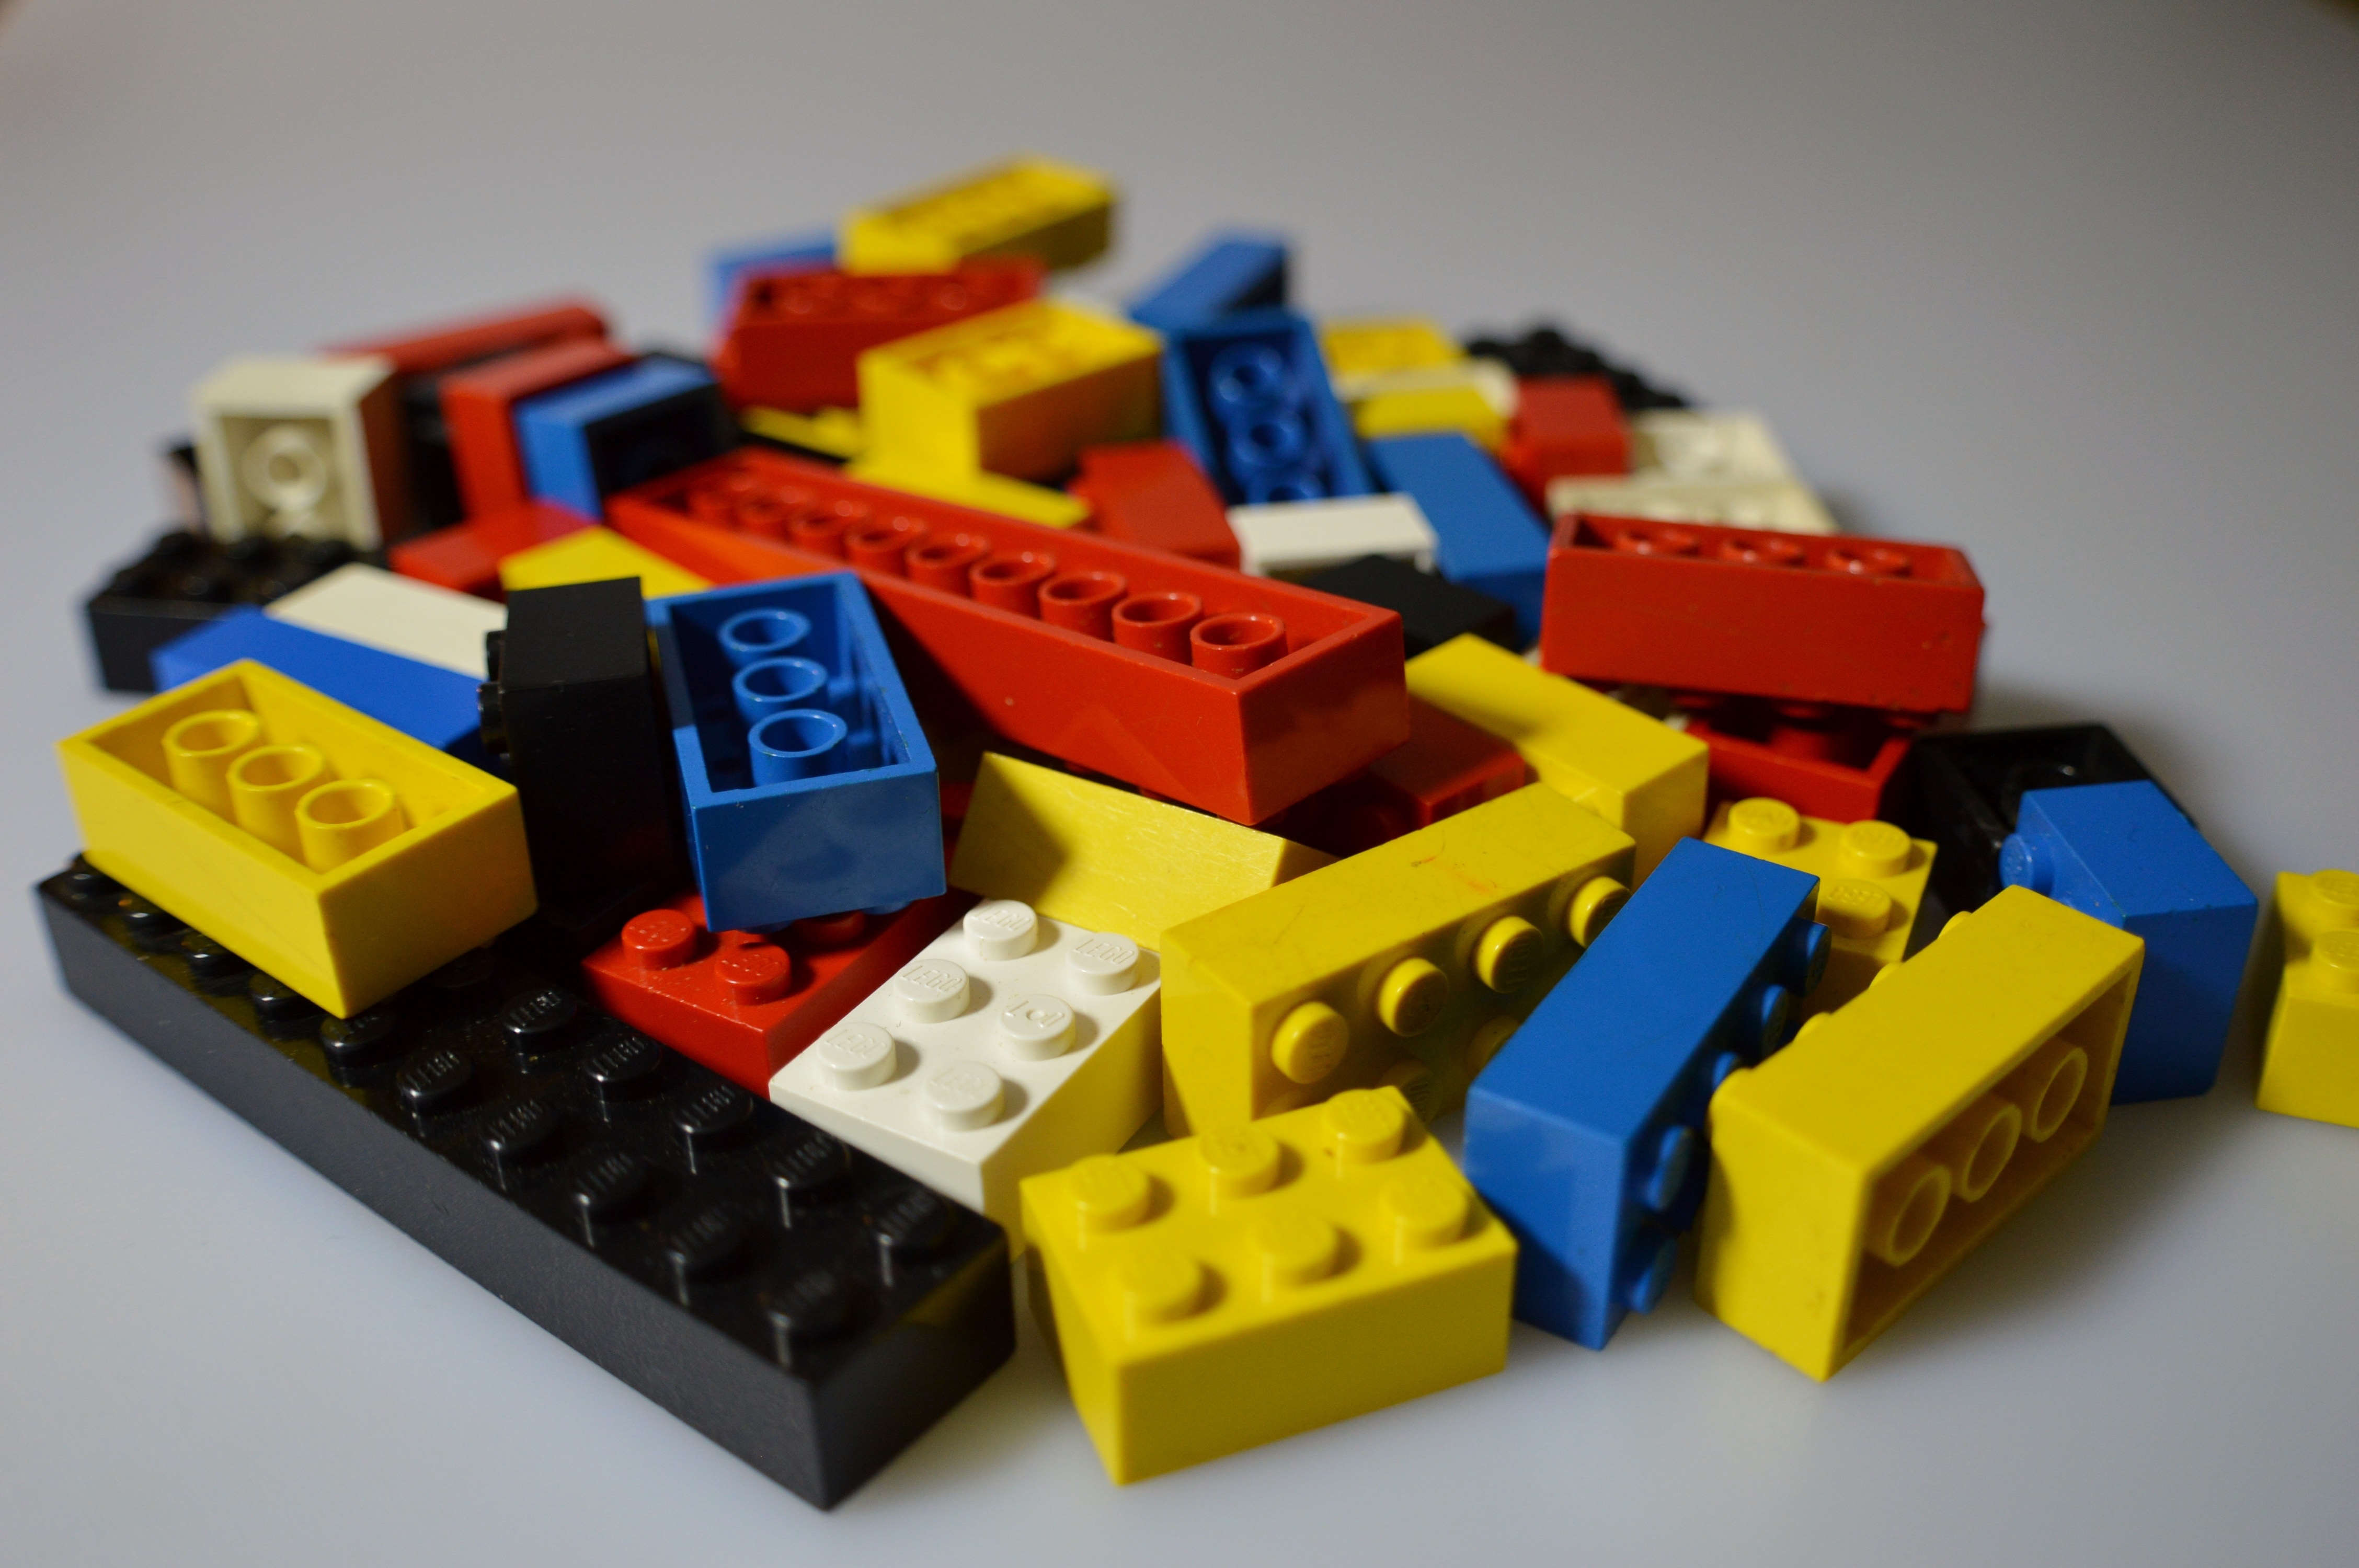 Play, Children, Lego, Colorful, Toys, yellow, toy block